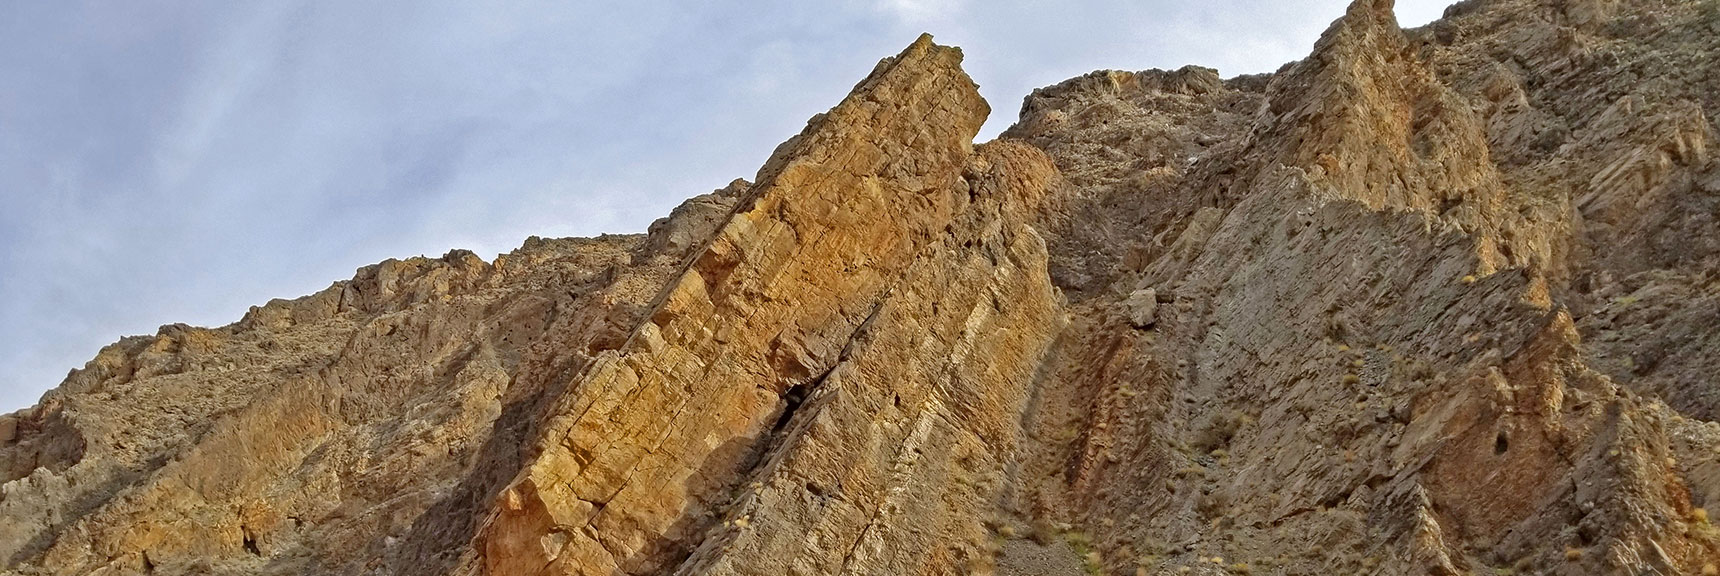 Massive Layers Tilting Upward at a 45 Degree Angle. | Titus Canyon Grand Loop by Mountain Bike | Death Valley National Park, California